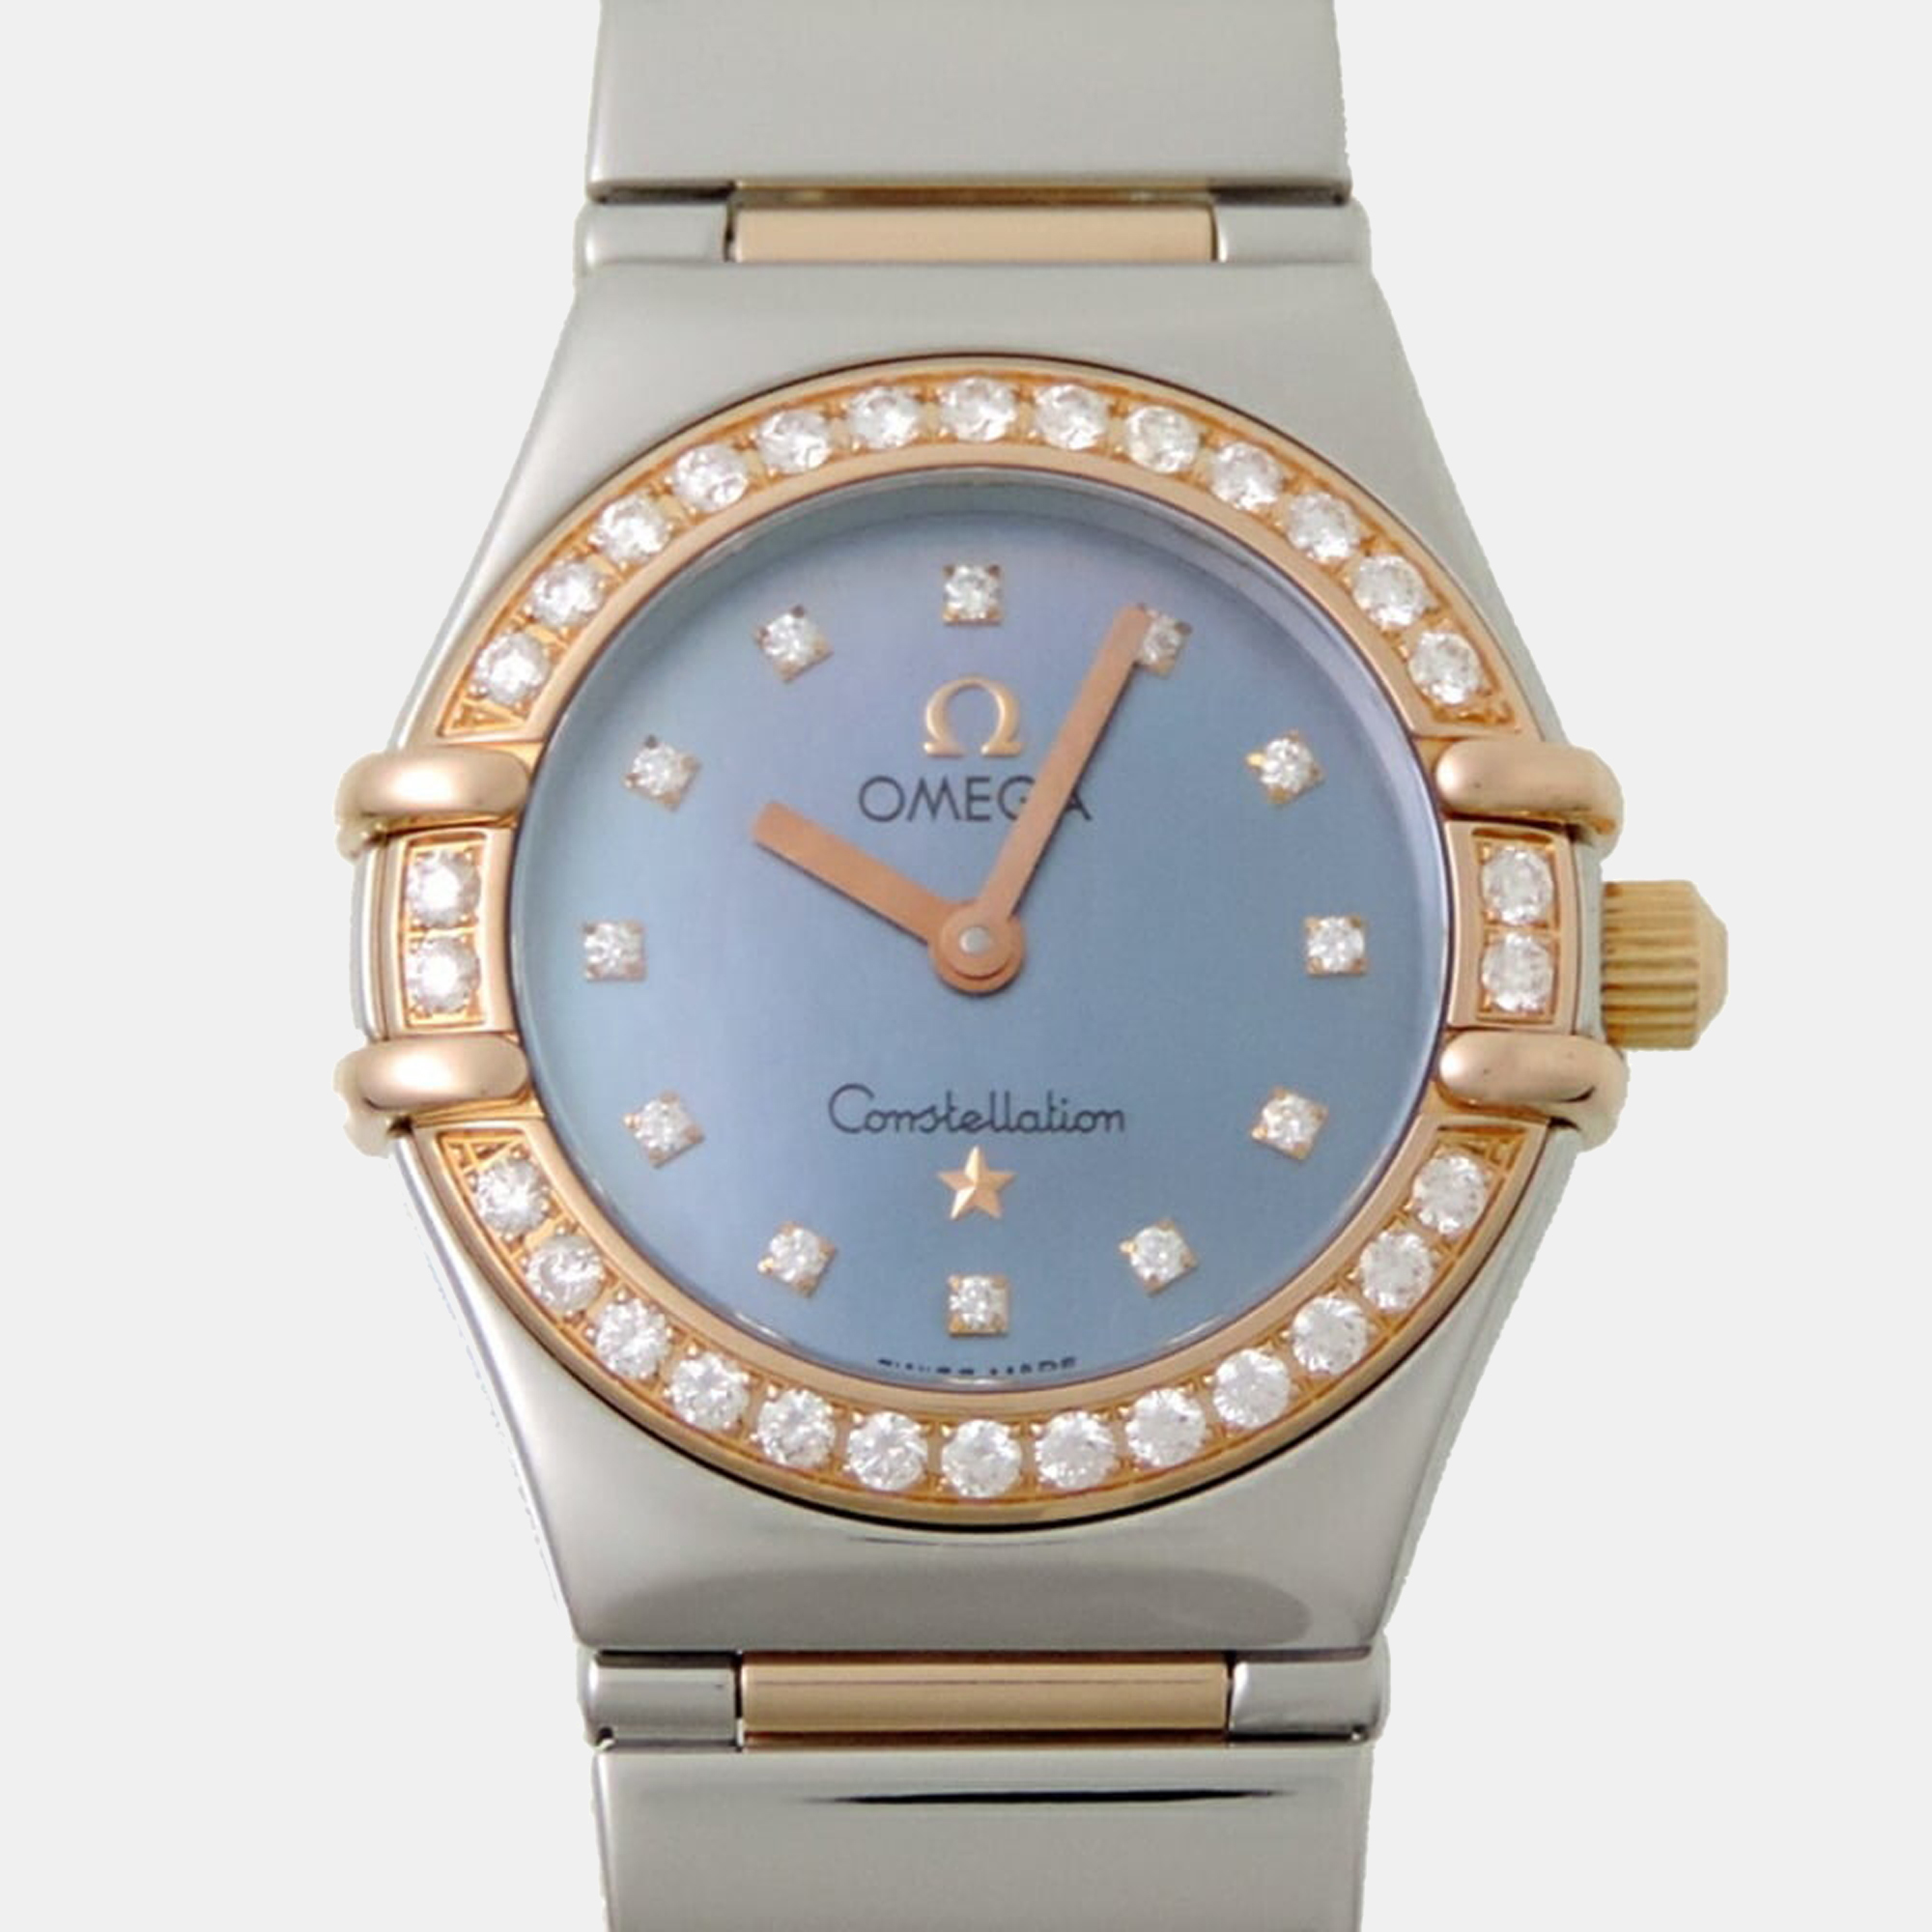 Pre-owned Omega Blue Diamonds 18k Rose Gold And Stainless Steel My Choice Constellation 1357.77.00 Quartz Women's Wr